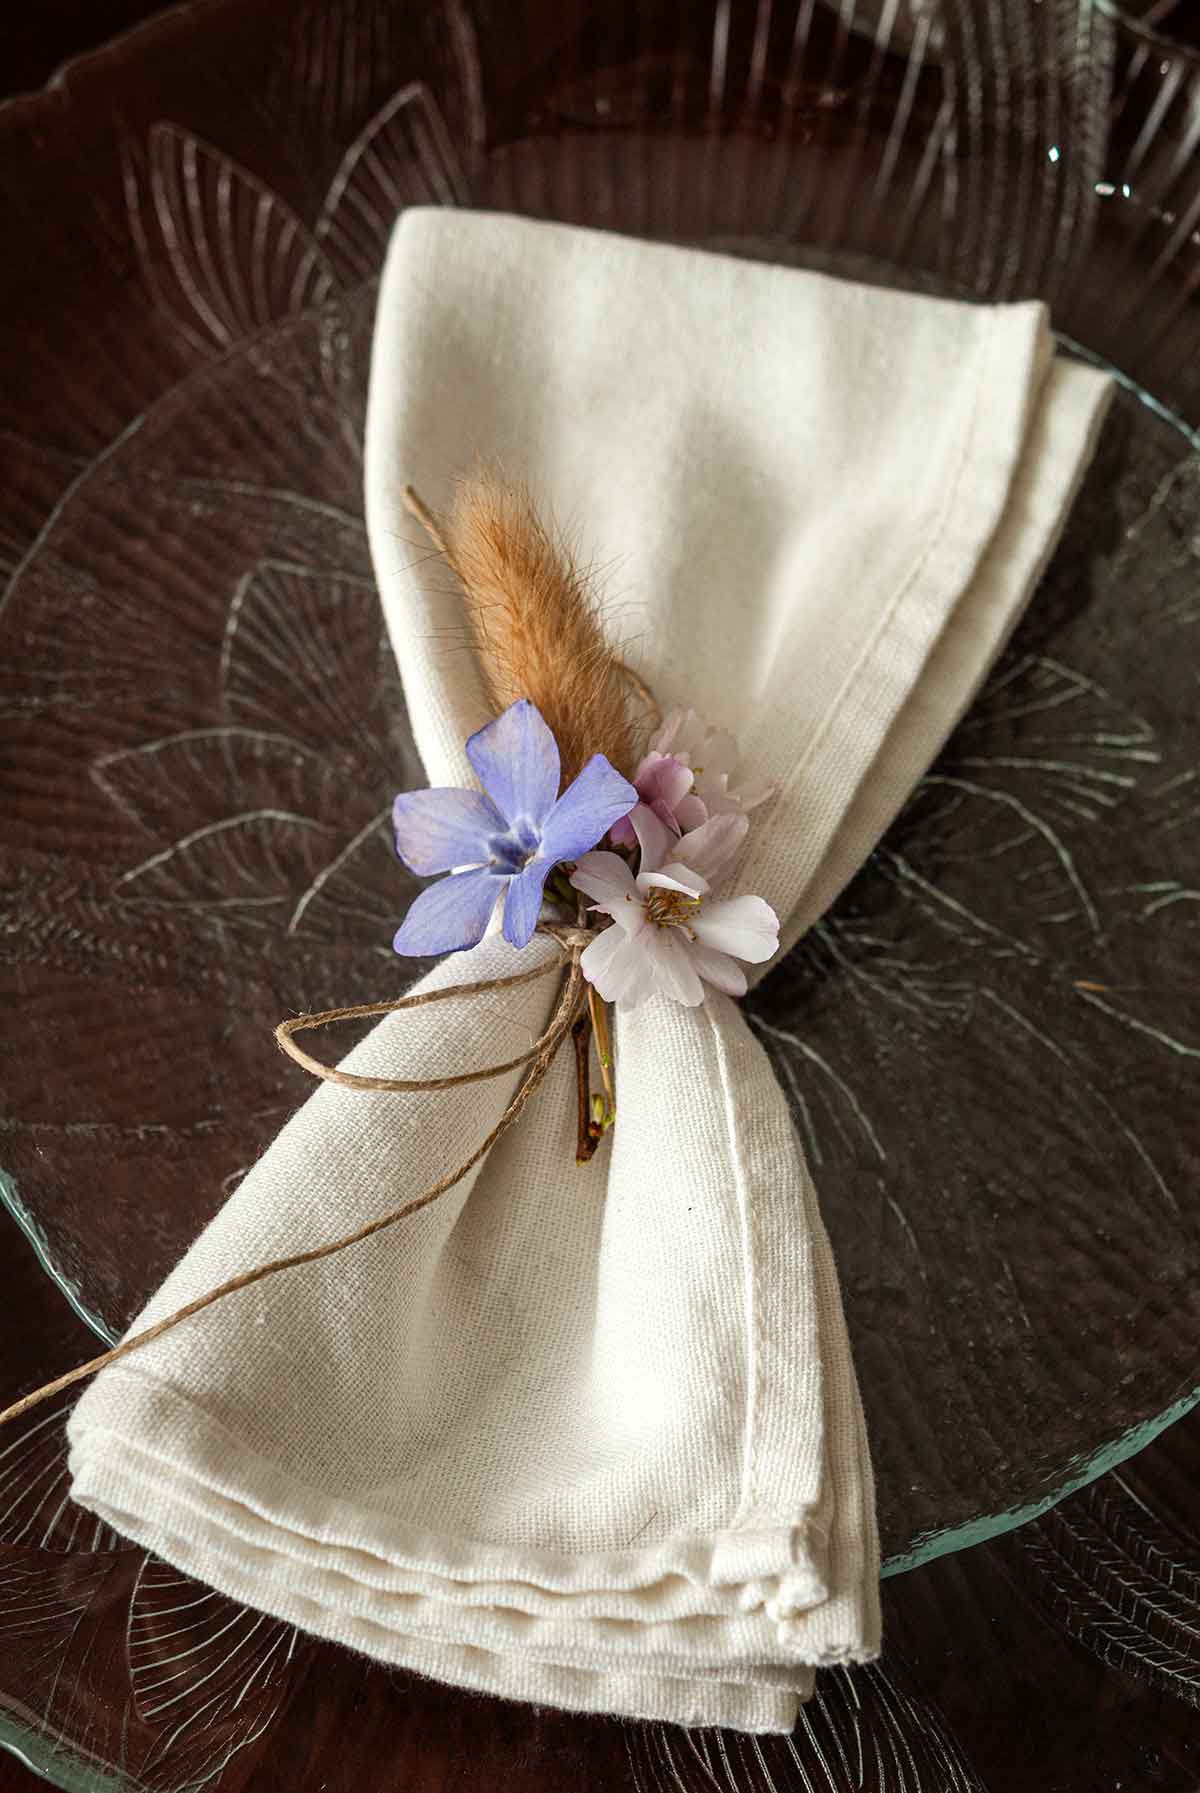 A napkin with flowers tied to the center on a plate.